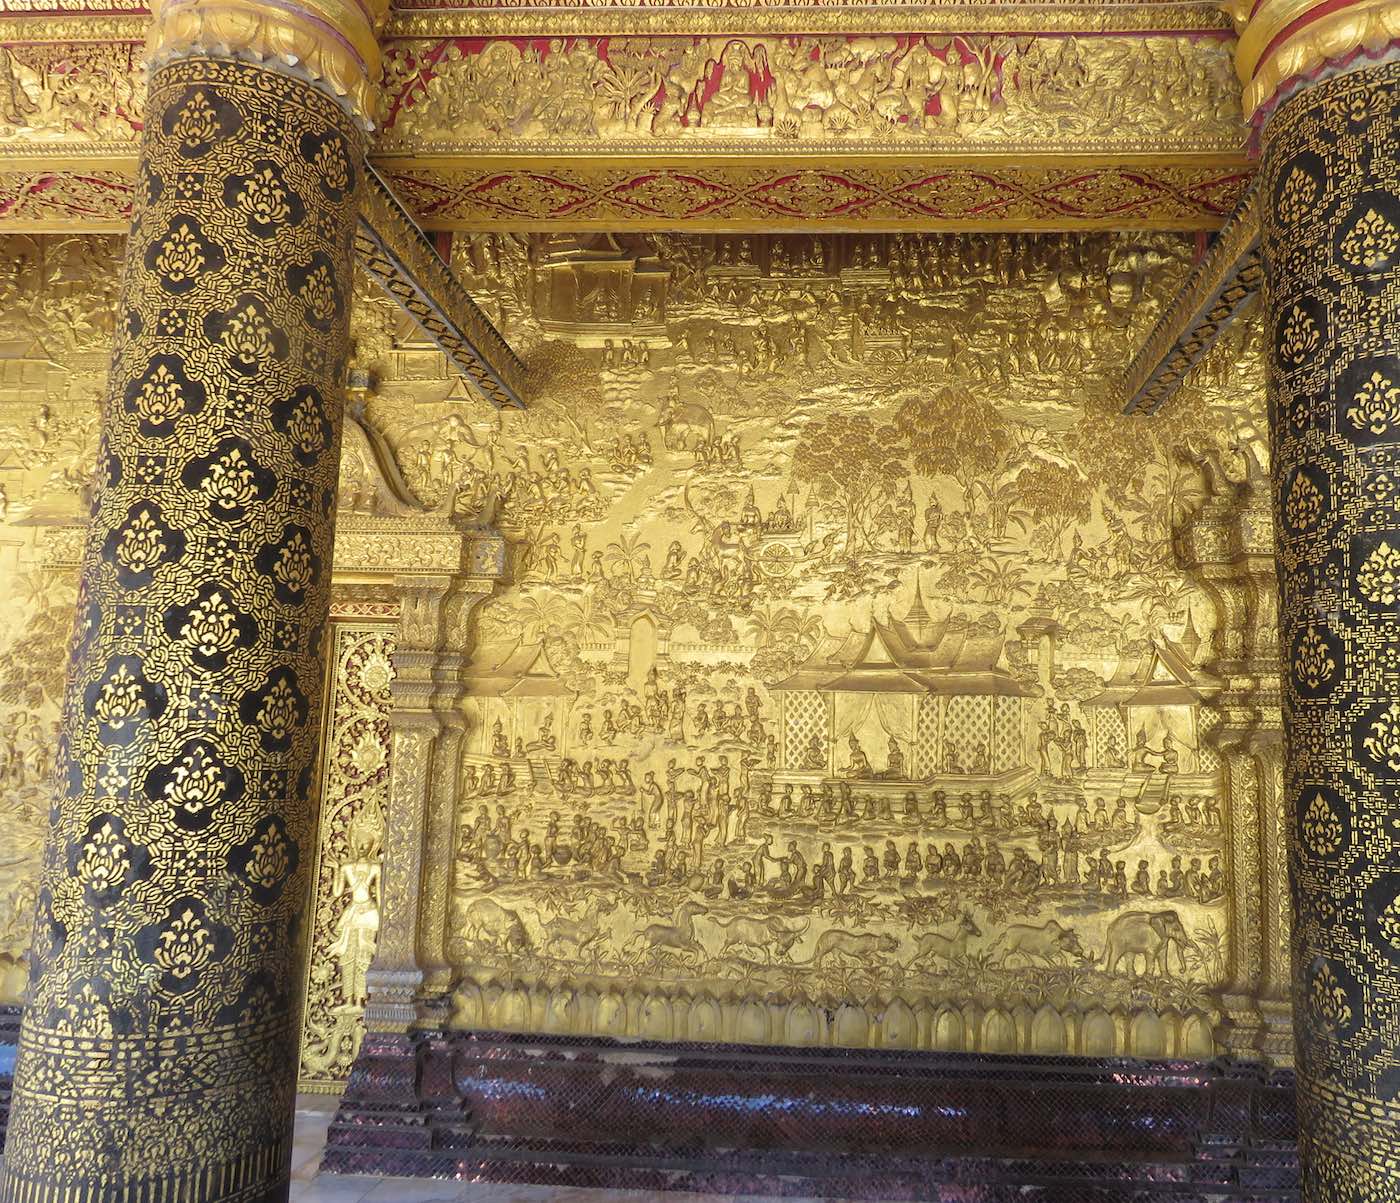 Outside golden wall with relief art